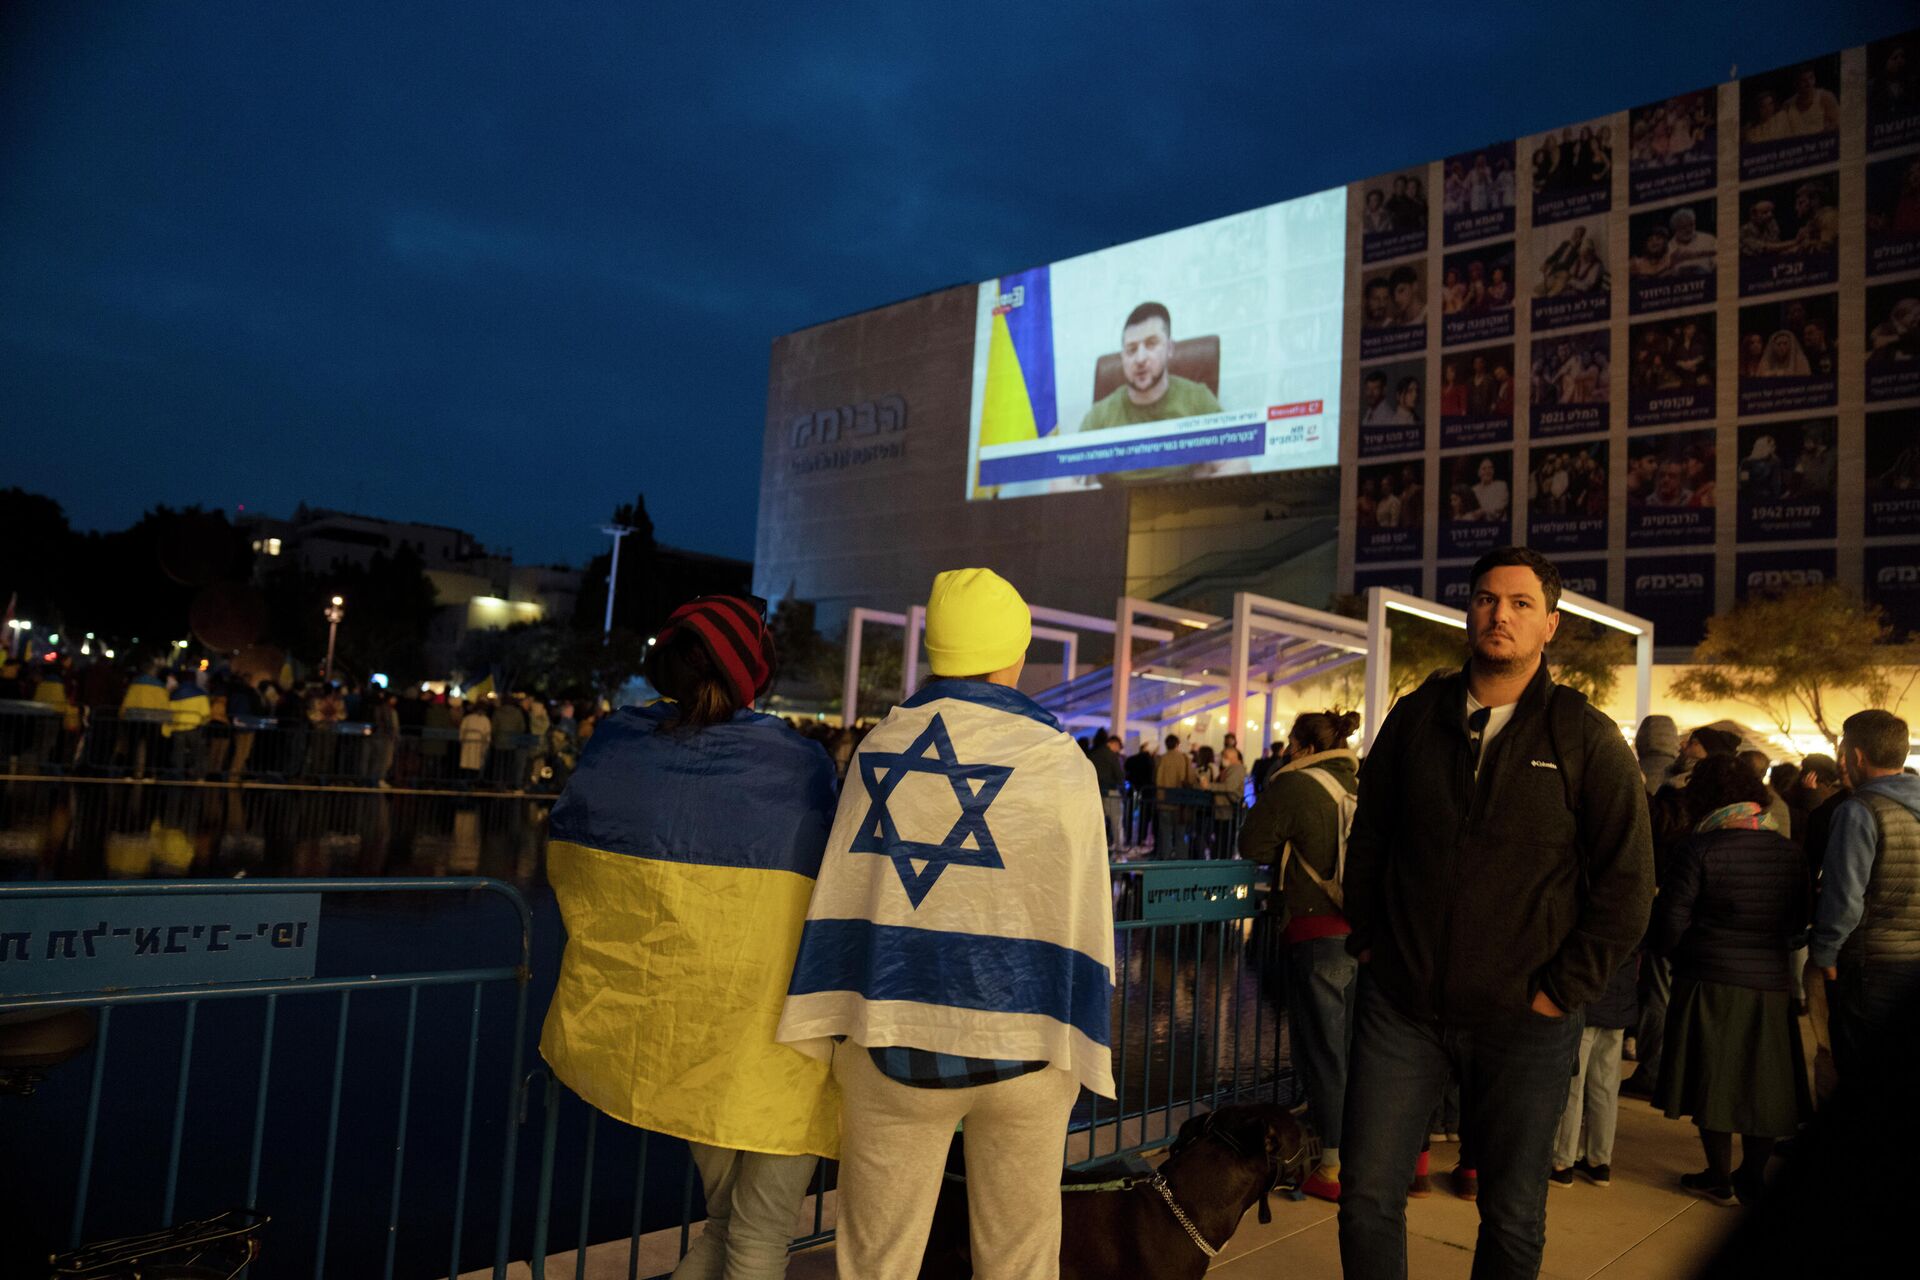 People gather in Habima Square in Tel Aviv, Israel, to watch Ukrainian President Volodymyr Zelensky  in a video address to the Knesset, Israel's parliament, Sunday, March 20, 2022 - Sputnik International, 1920, 28.03.2022